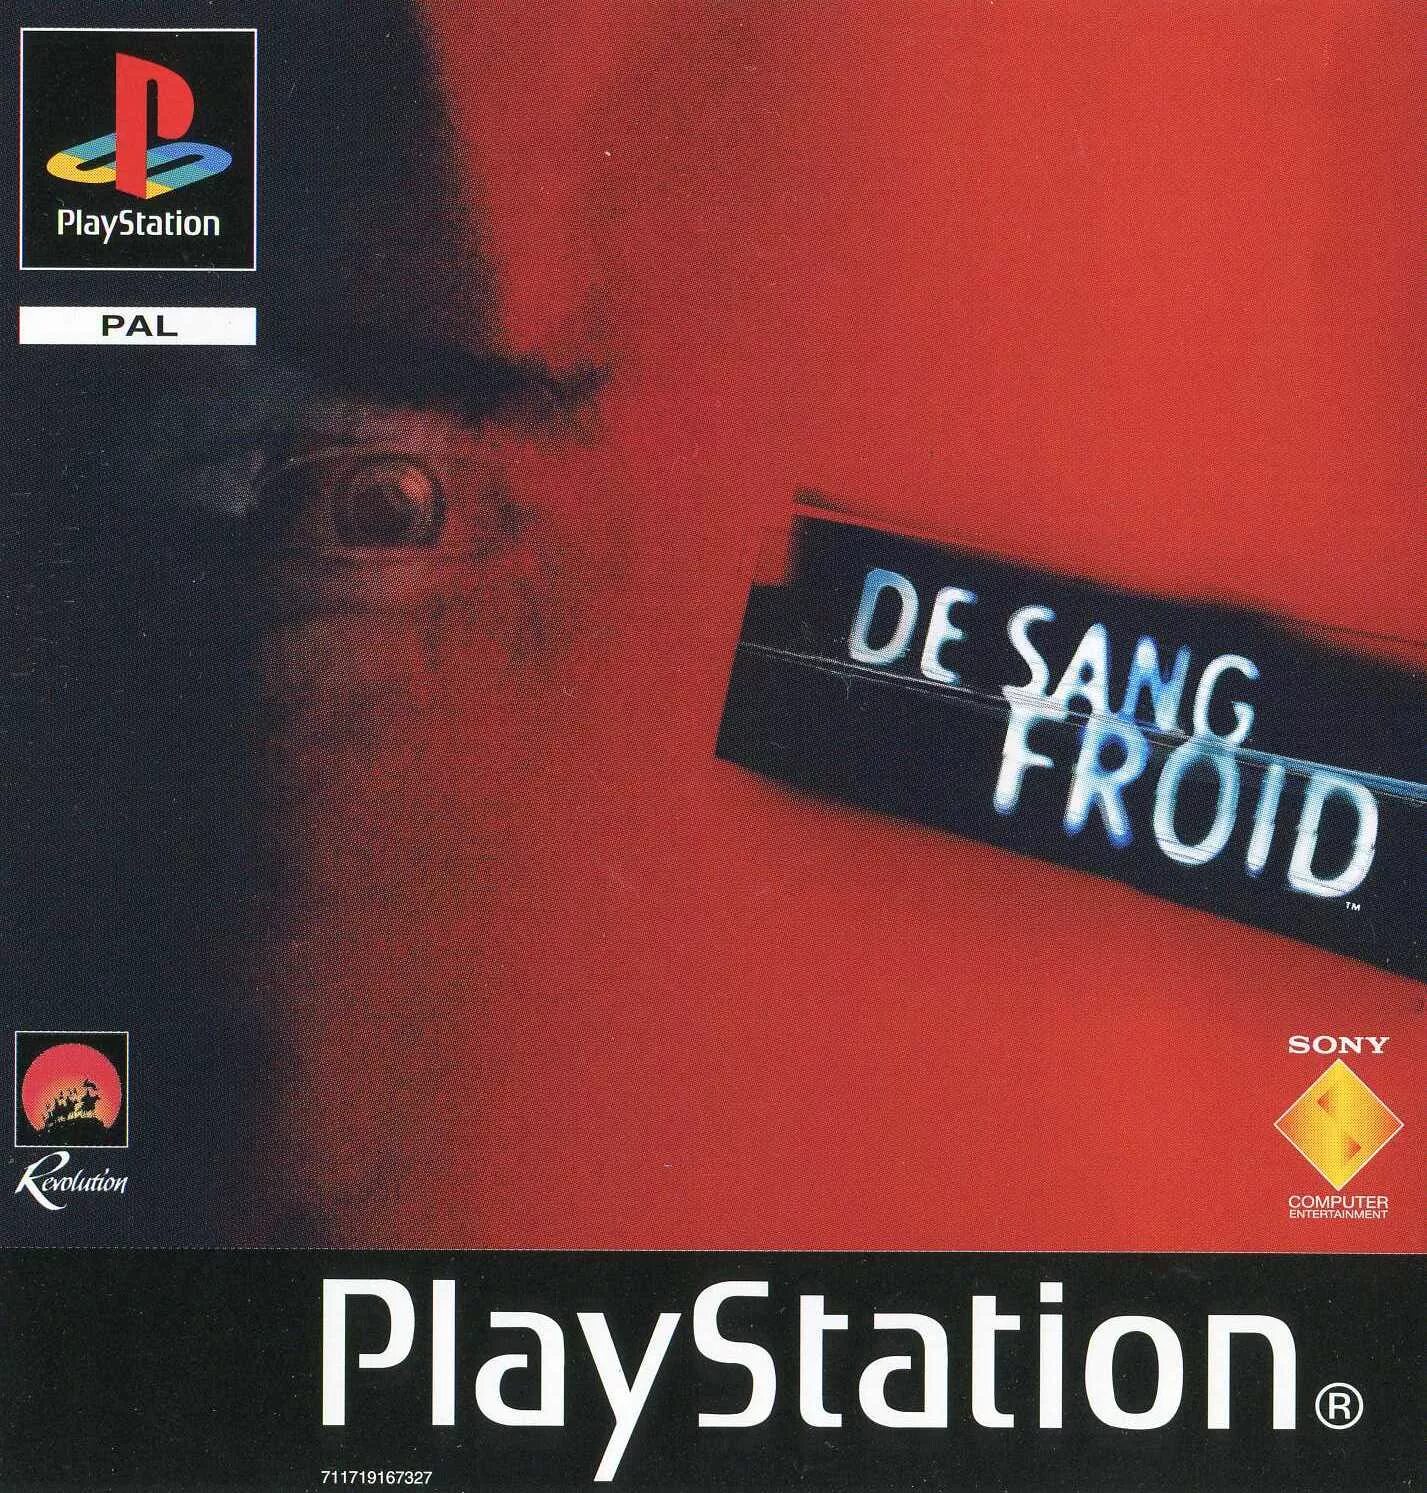 In Cold Blood ps1 обложка. In Cold Blood игра. Iron and Blood ps1. In-Cold-Blood ps1 Cover NTSC UC. De sang